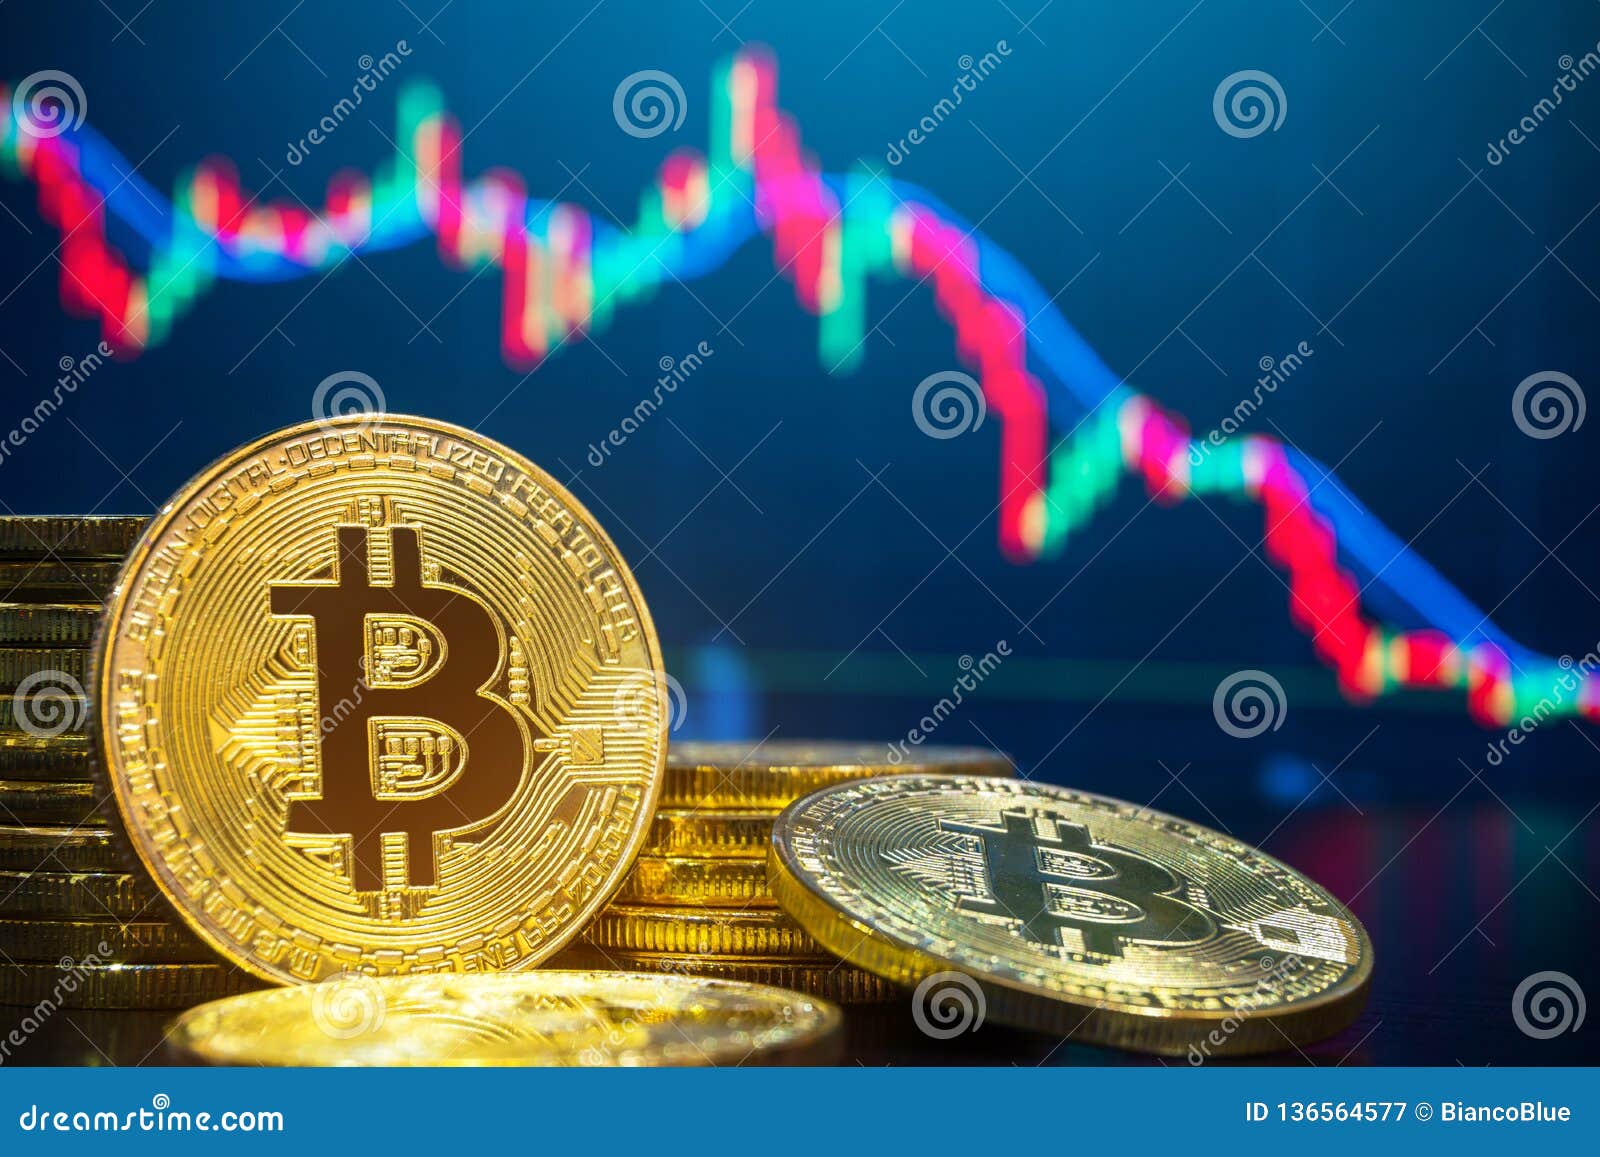 stock trading with bitcoin